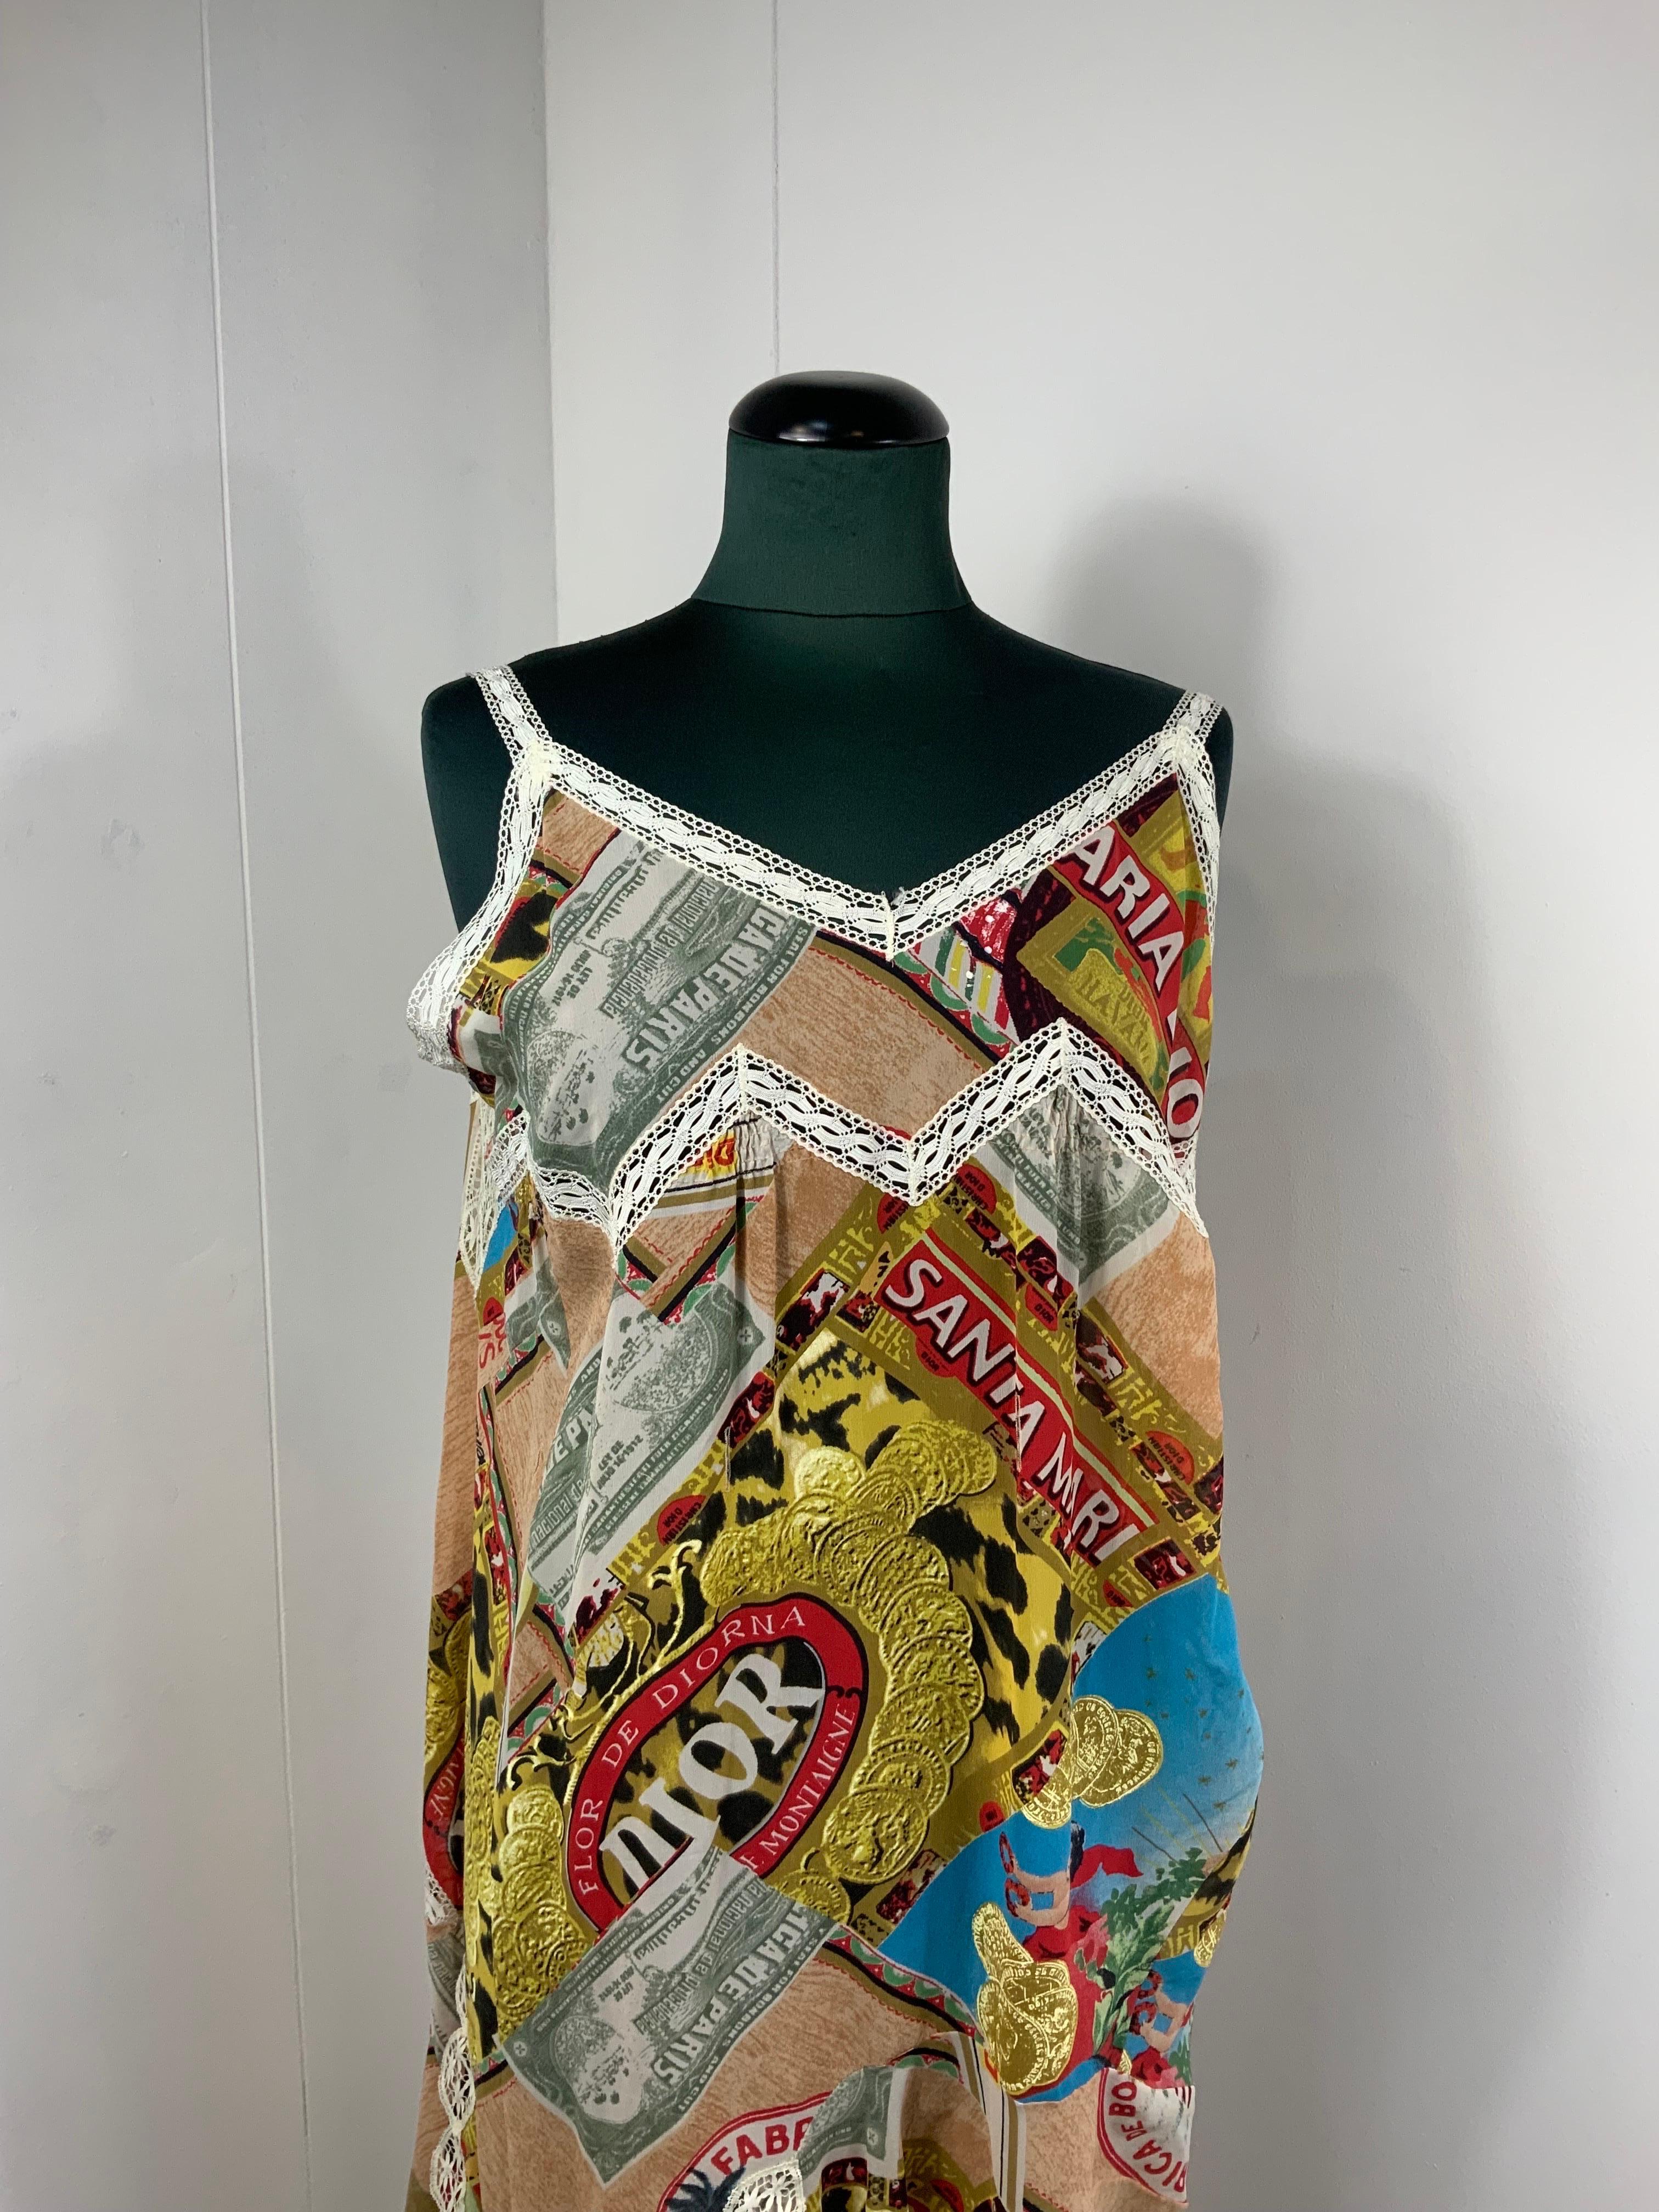 Christian Dior Dress. 
By John Galliano. SS 2002.
100% silk, cotton details. Iconic pattern. 
Dress can be worn with 2 different styling. As seen in photos. 
Size 38 FR.
Conditions: very good, it shows normal use signs. The dress was born with a